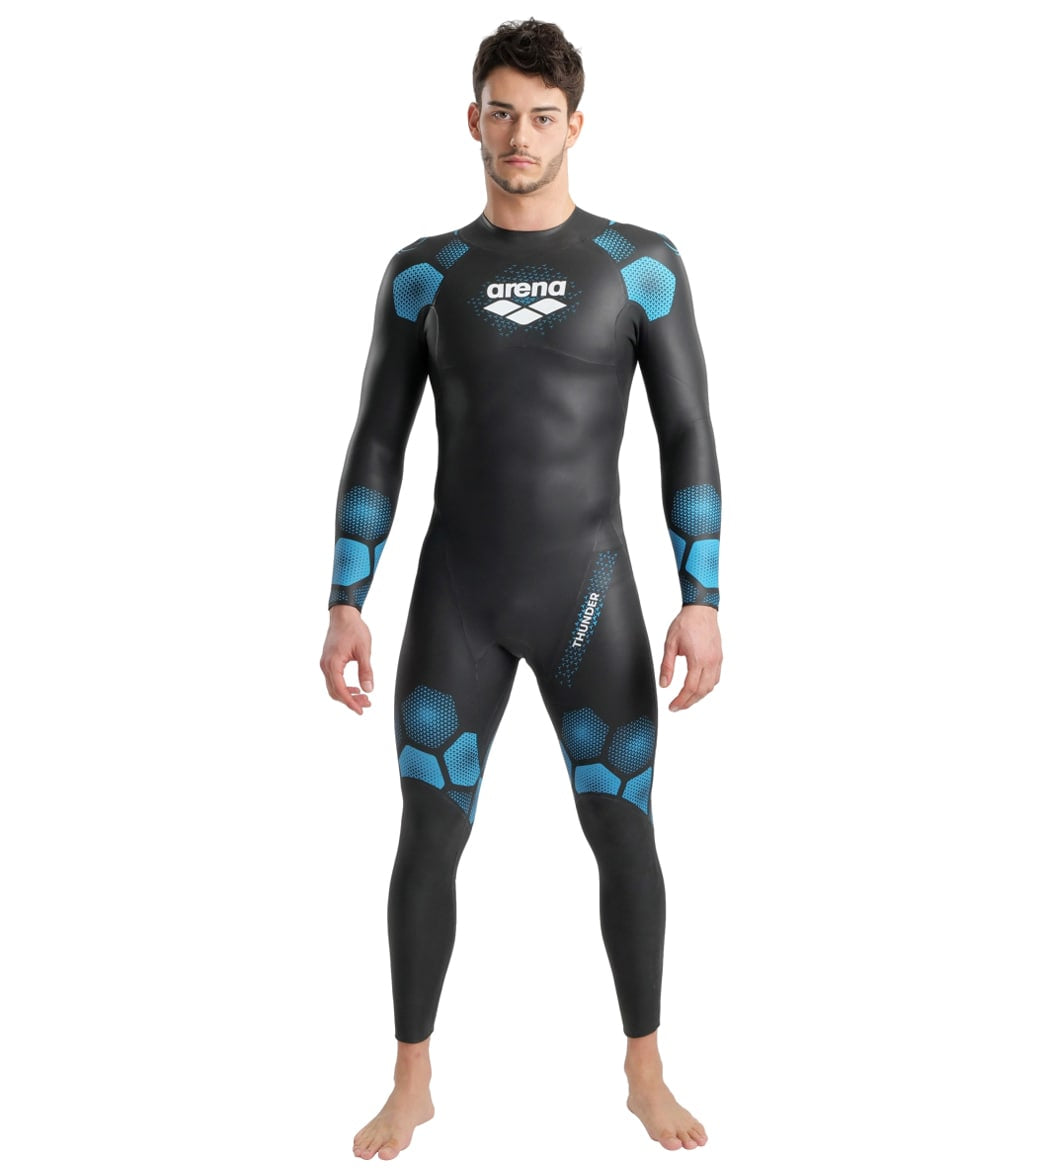 Arena Men's Thunder Wetsuit at